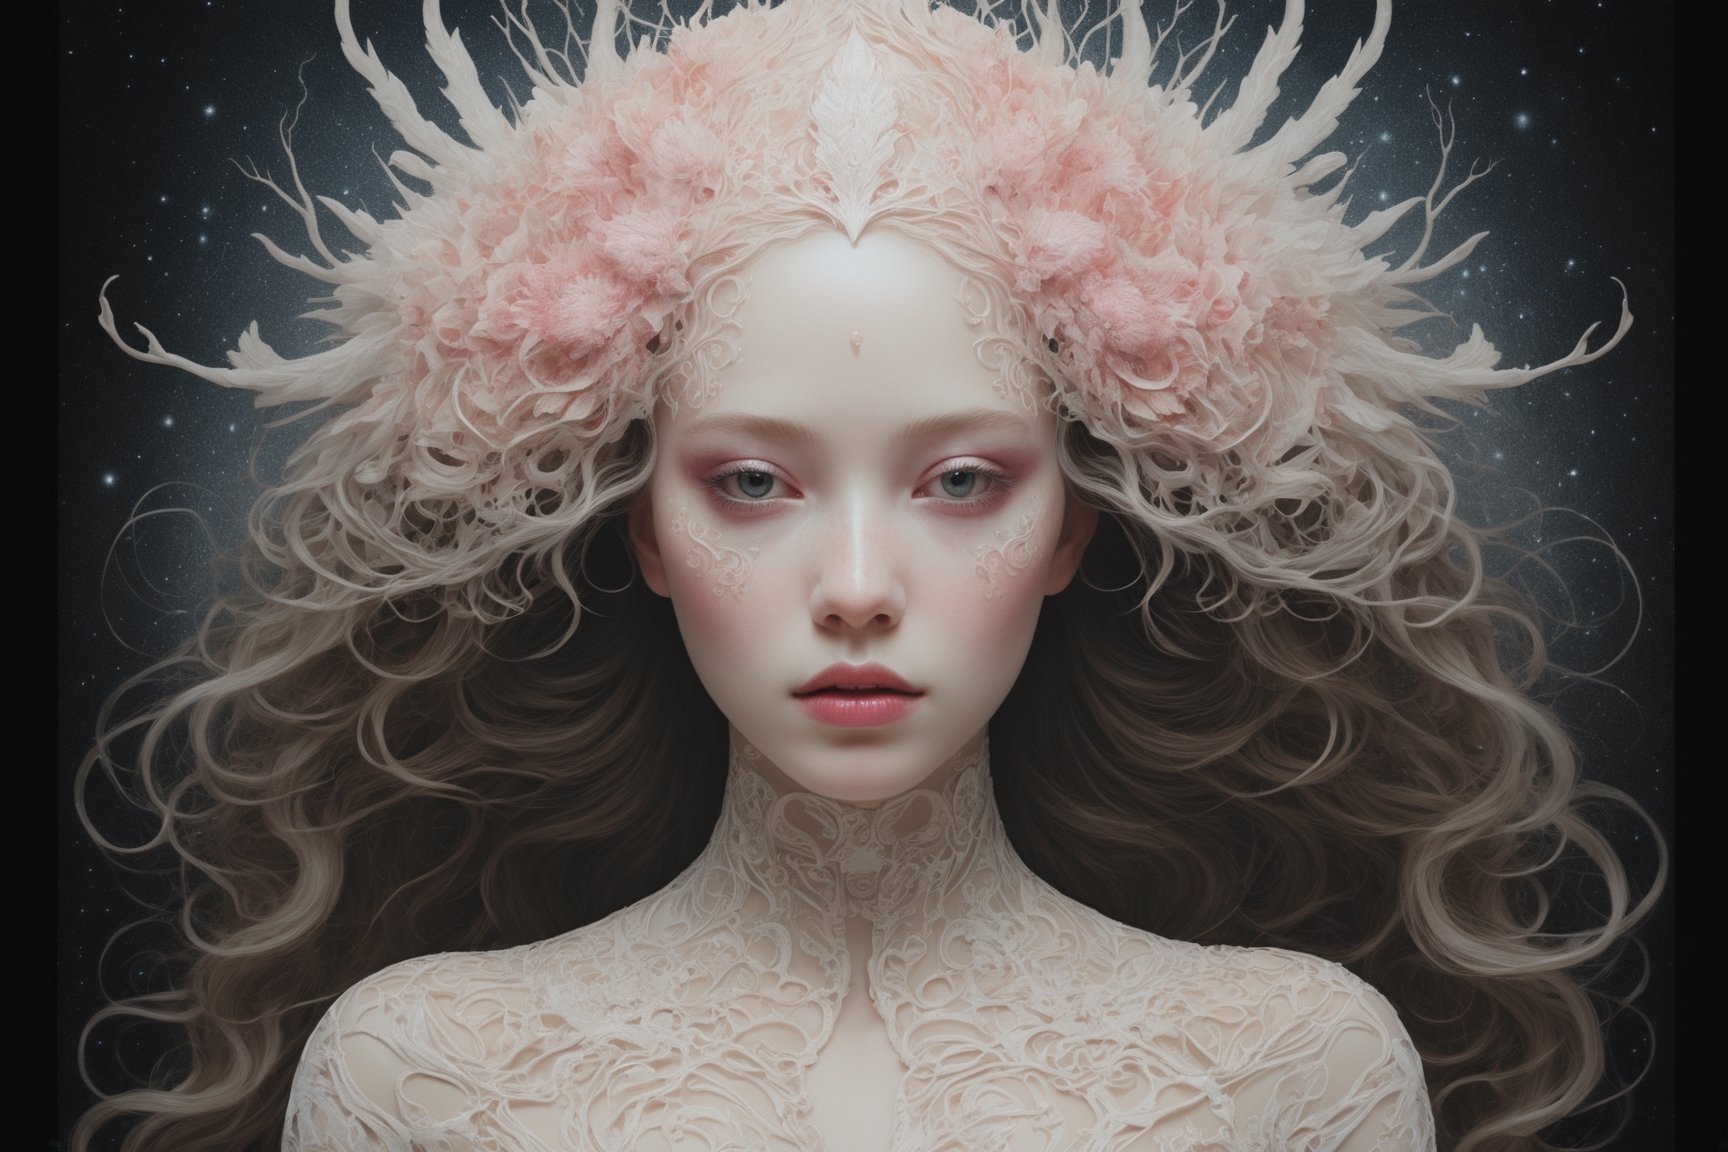 This paragraph describes a stunning image of a ghostly woman with Axolotl features and a human face. The image is primarily a painting, filled with vibrant colors such as pink, cream, red, white, and luminescence. The woman has a shiny aura surrounding her, and her presence is further enhanced by the intricate red filigree designs that adorn the artwork. The style of the image takes inspiration from artists Januz Miralles and Audrey Kawasaki, known for their captivating and atmospheric pieces. The overall effect of the image is ethereal, as if the woman is enveloped in glowing stardust, created expertly by artist W. Zelmer. The image is of exceptional quality, showcasing the fine details and masterful blending of colors. The background is like a dark image within the depths of the ocean while a sunken rustic ship is portrait stranded in the distance  Kinetic Art,  visionary,  gothic,  (((ancient mythical being:1.4))),  neo - gothic,  pre - raphaelite,  fractal lace, intricate mythical botanical,  ai biodiversity,  surrealism,  hyper detailed ultra sharp octane render,  (Audrey Kawasaki,  Anna Dittmann:1.4),  known for their captivating and atmospheric pieces. The overall effect of the image is ethereal,  as if the woman is enveloped in glowing stardust,  created expertly by artist W. Zelmer. The image is of exceptional quality,  showcasing the fine details and masterful blending of colors,